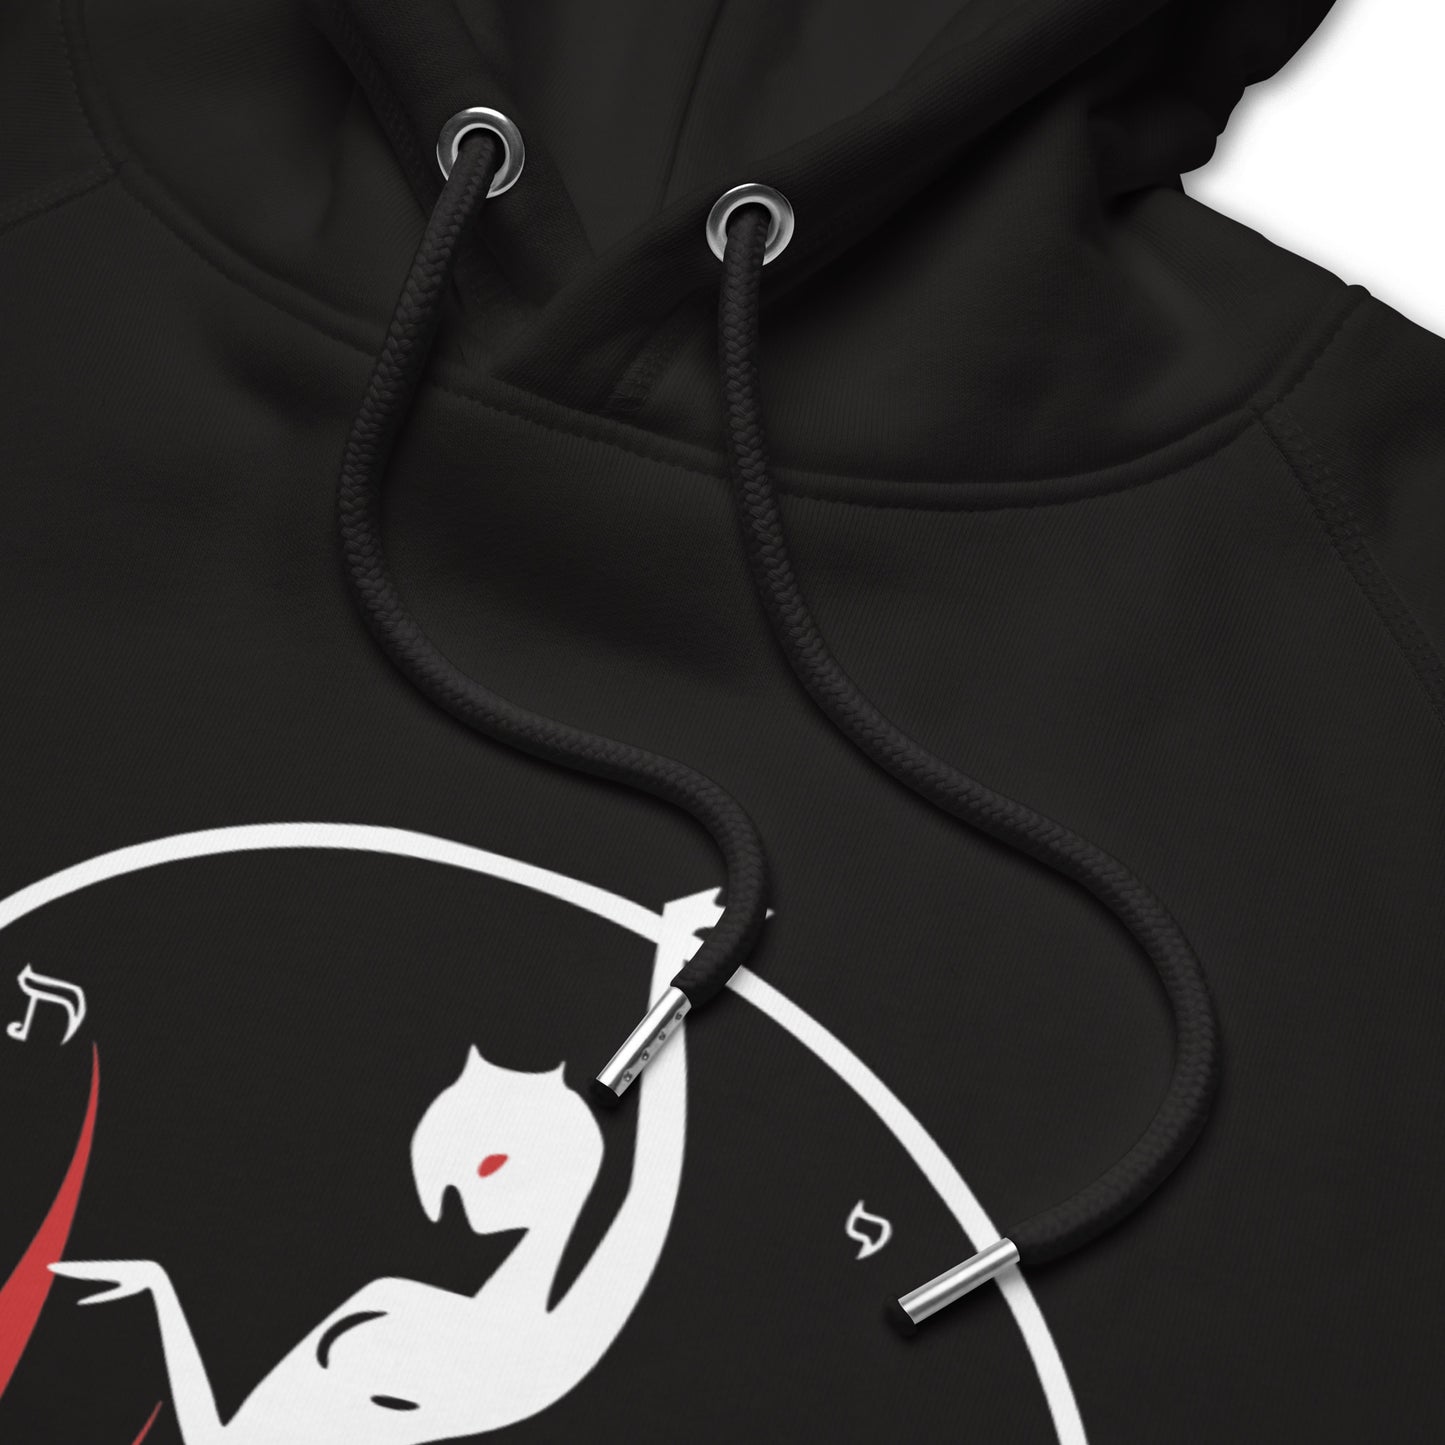 Lilith v.2 Unisex pullover hoodie